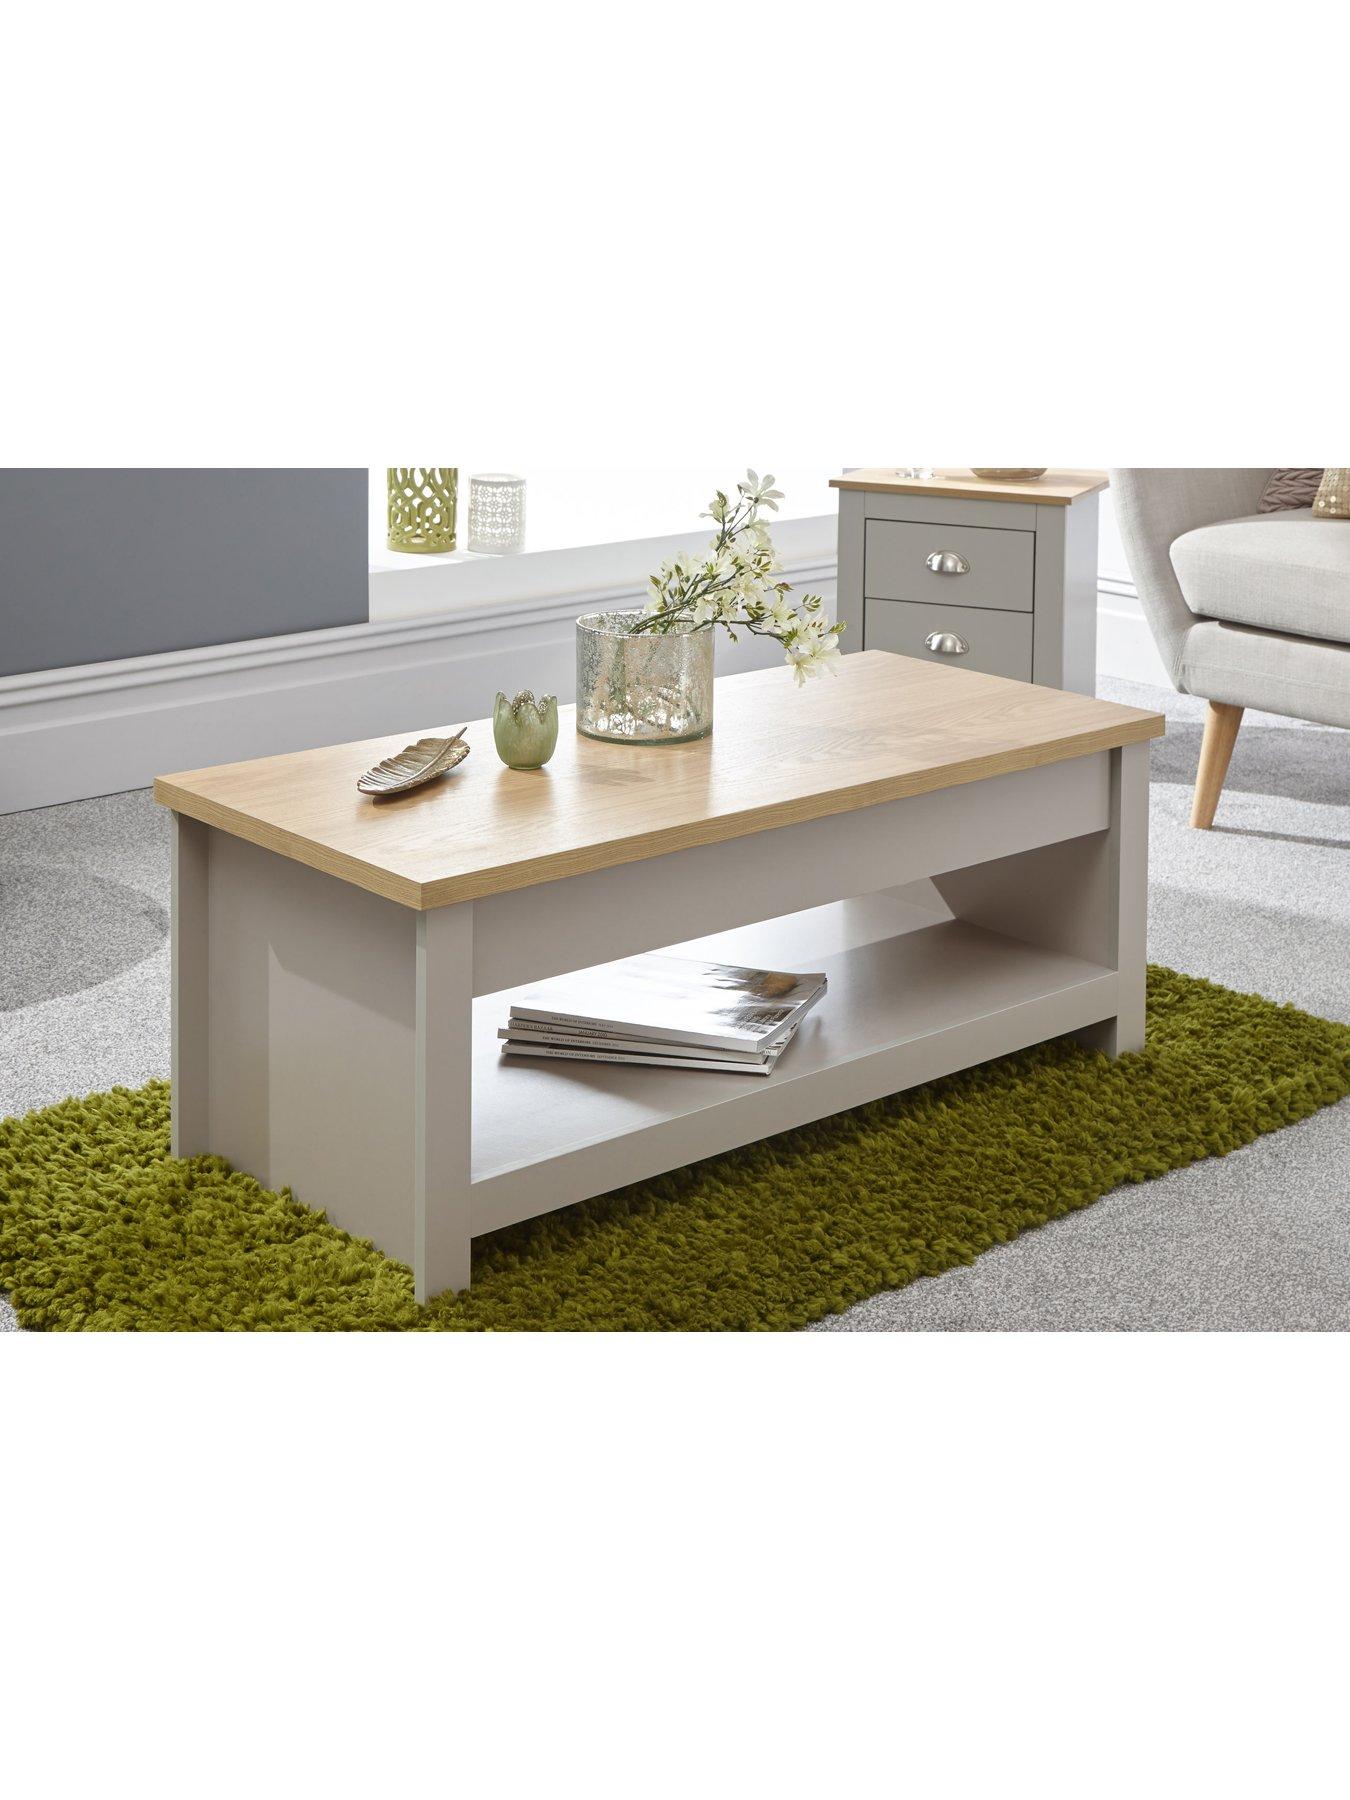 Gfw Lancaster Lift Up Coffee Table - Grey